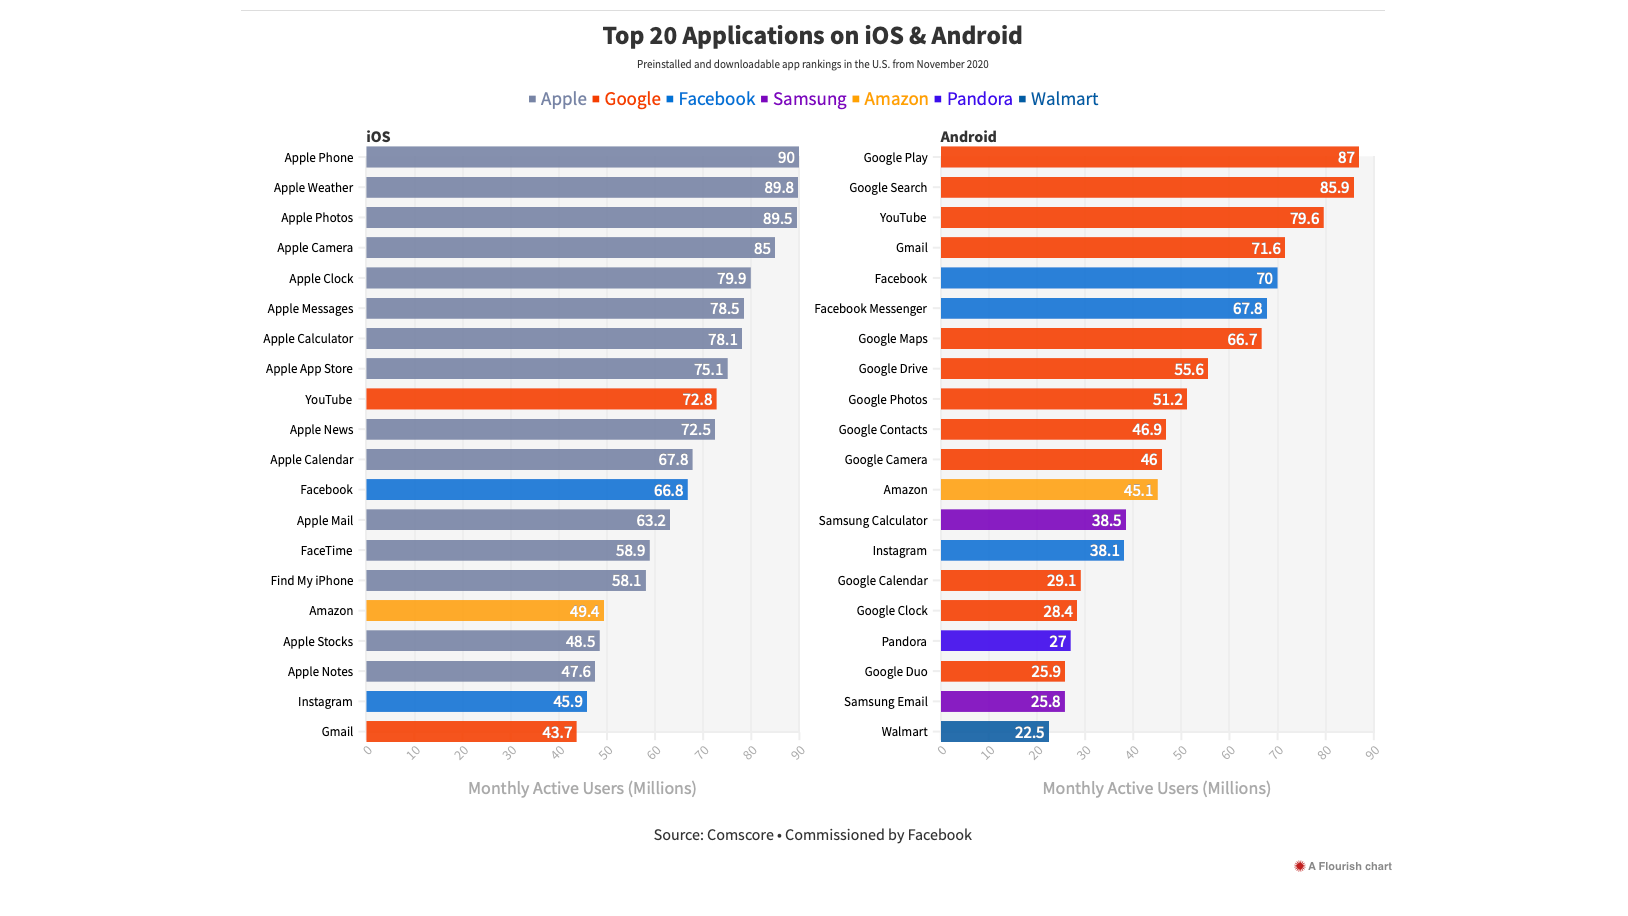 Top 20 Applications on iOS &amp;amp; Android. Pre-installed and downloadable app rankings in the U.S. from November 2020. Sour - Comscore (commissioned by Facebook). - Is it fair to say Apple and Google have monopolized their own app stores?